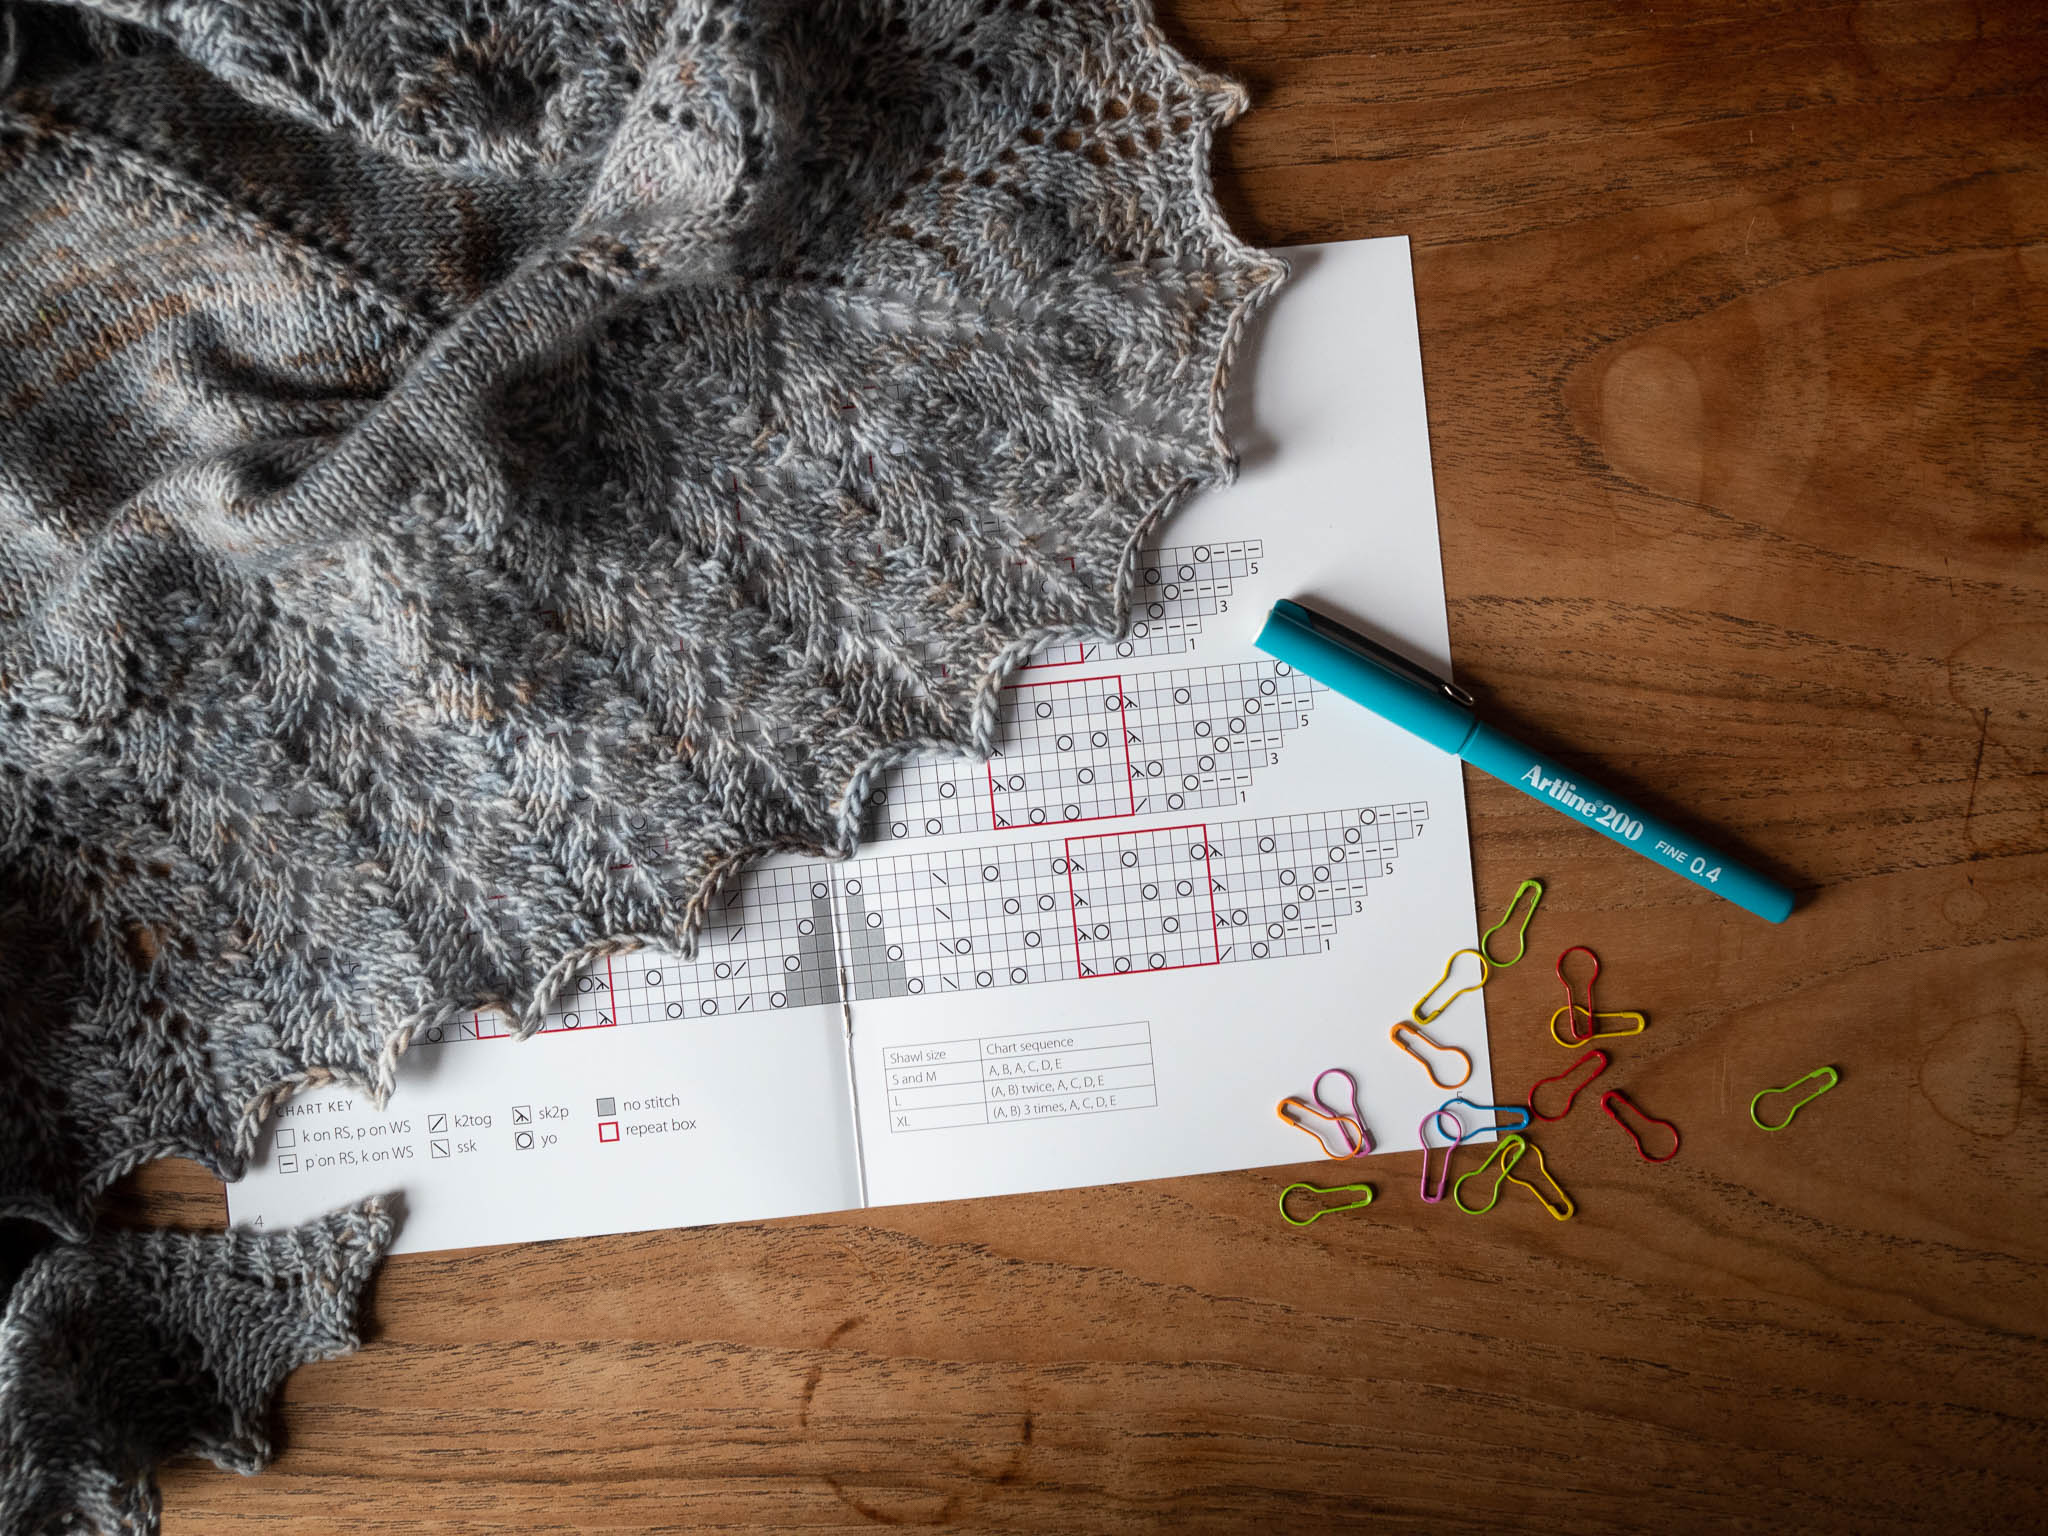 Left Handed Knitters Graph Paper: The Perfect Knitter's Gifts for All Beginner Knitter. If You Are Beginning Knitter This Can Helps You to Do Your Work [Book]